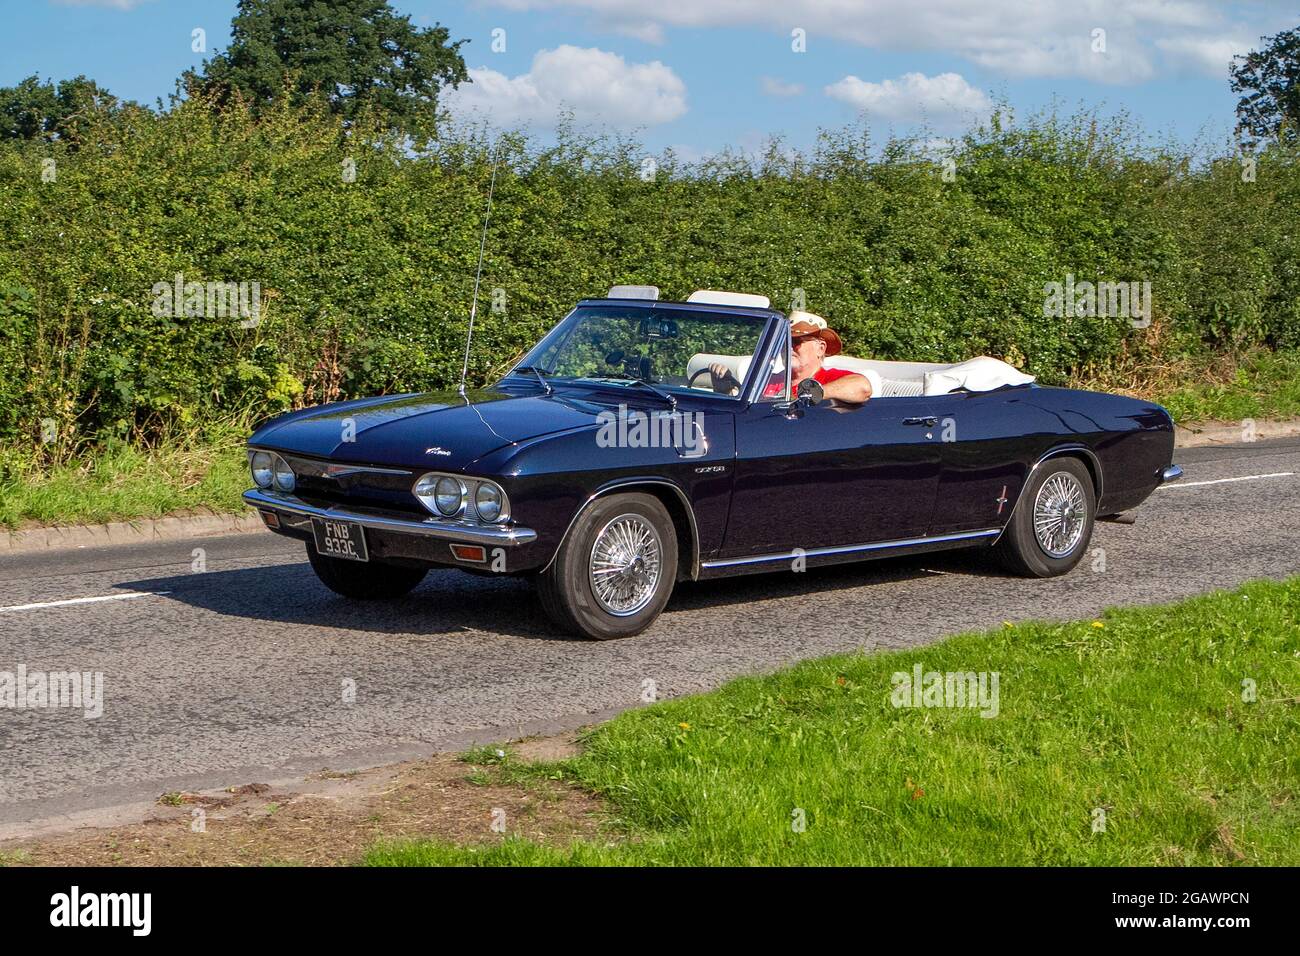 A American 1965 60s Chevrolet Corvair blue cabriolet classic vintage car arriving at the Capesthorne Hall classic car show. Stock Photo